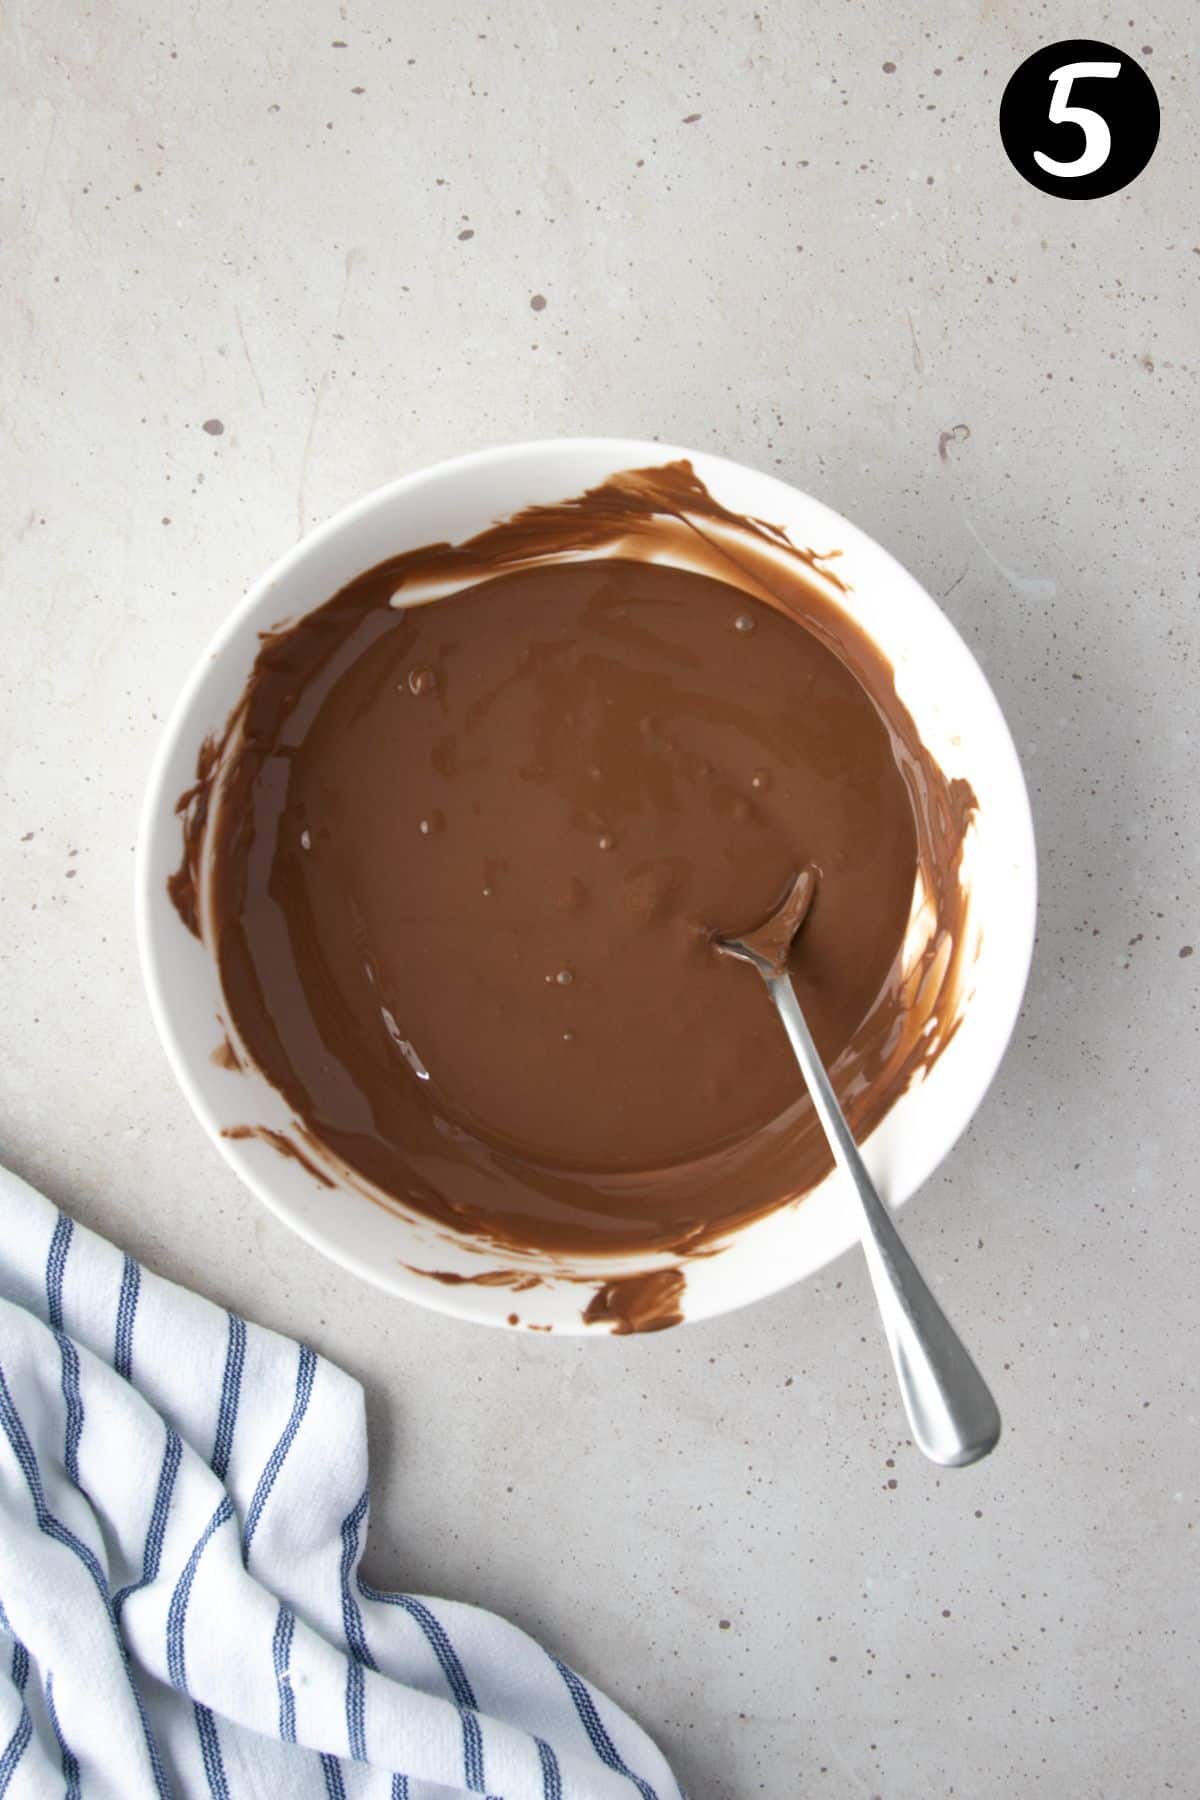 melted chocolate in a white bowl with a spoon.